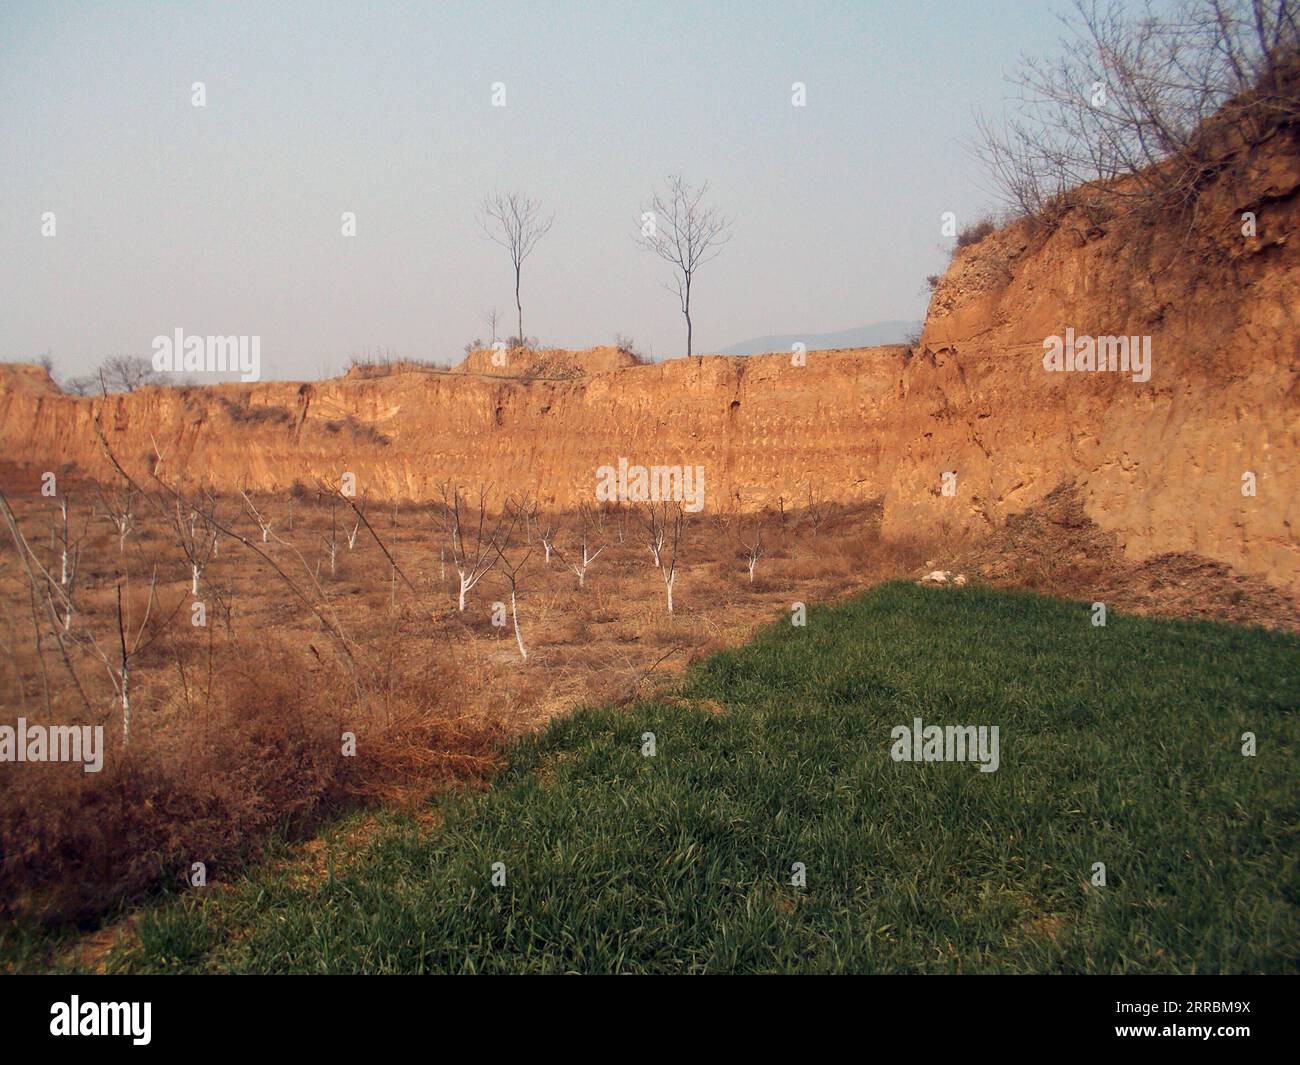 210929 -- XI AN, Sept. 29, 2021 -- Photo shows a water pond ruin at the Zhouyuan site in Baoji City, northwest China s Shaanxi Province. Archaeologists in Shaanxi said they have discovered large ponds and ditches at an archaeological site in the province. Located in Baoji City, the Zhouyuan site is believed to be the largest city ruins of the Western Zhou Dynasty 1046-771 B.C.. Shaanxi Academy of Archeology/Handout via Xinhua CHINA-SHAANXI-ARCHAEOLOGY-ANCIENT DRAINAGE SYSTEM-DISCOVERY CN YangxYimiao PUBLICATIONxNOTxINxCHN Stock Photo